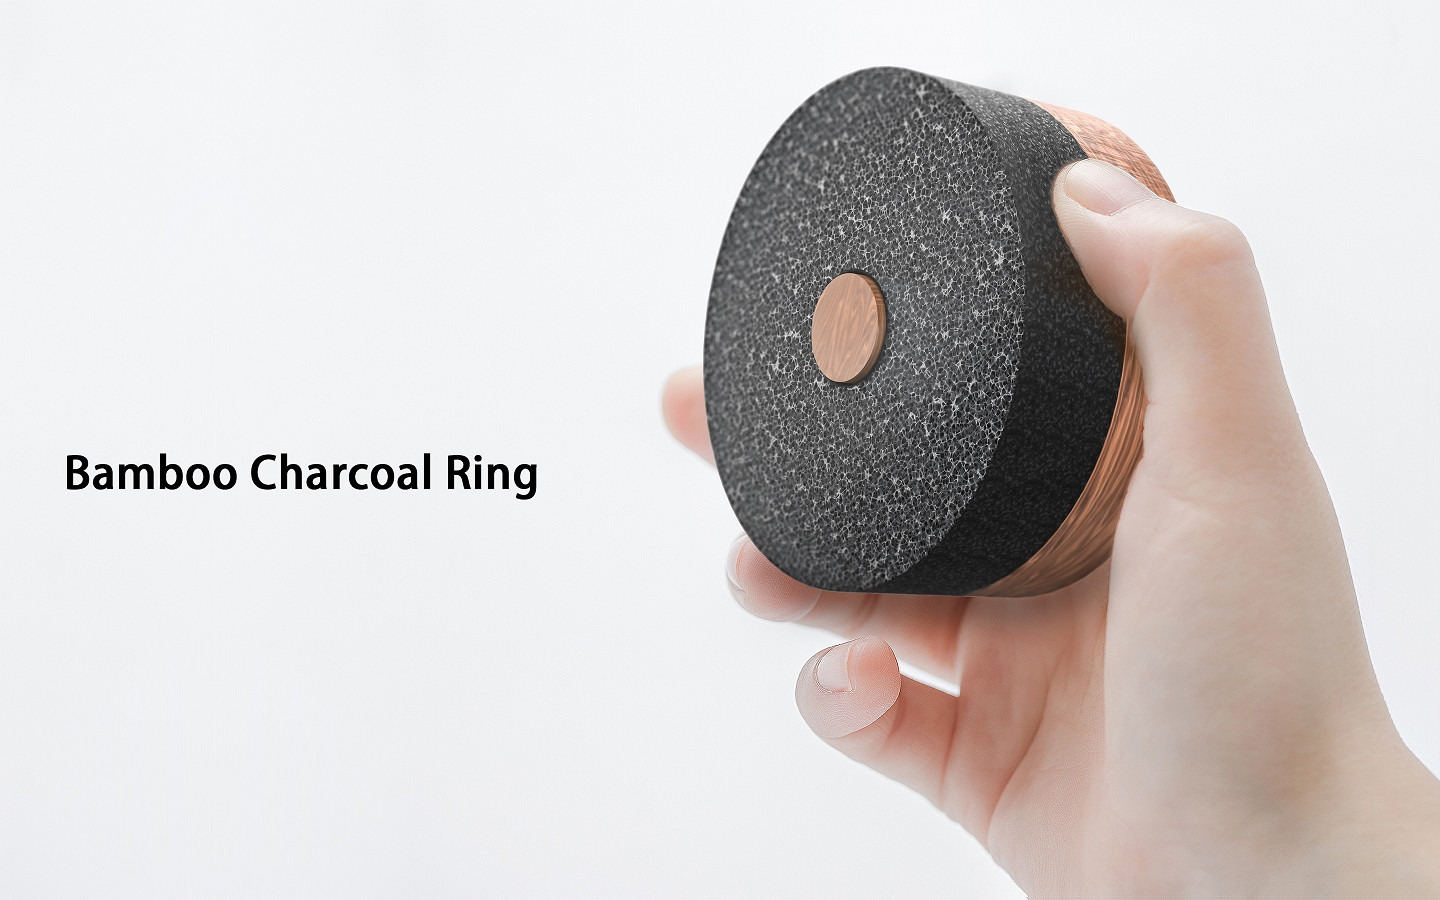 Bamboo Charcoal Ring